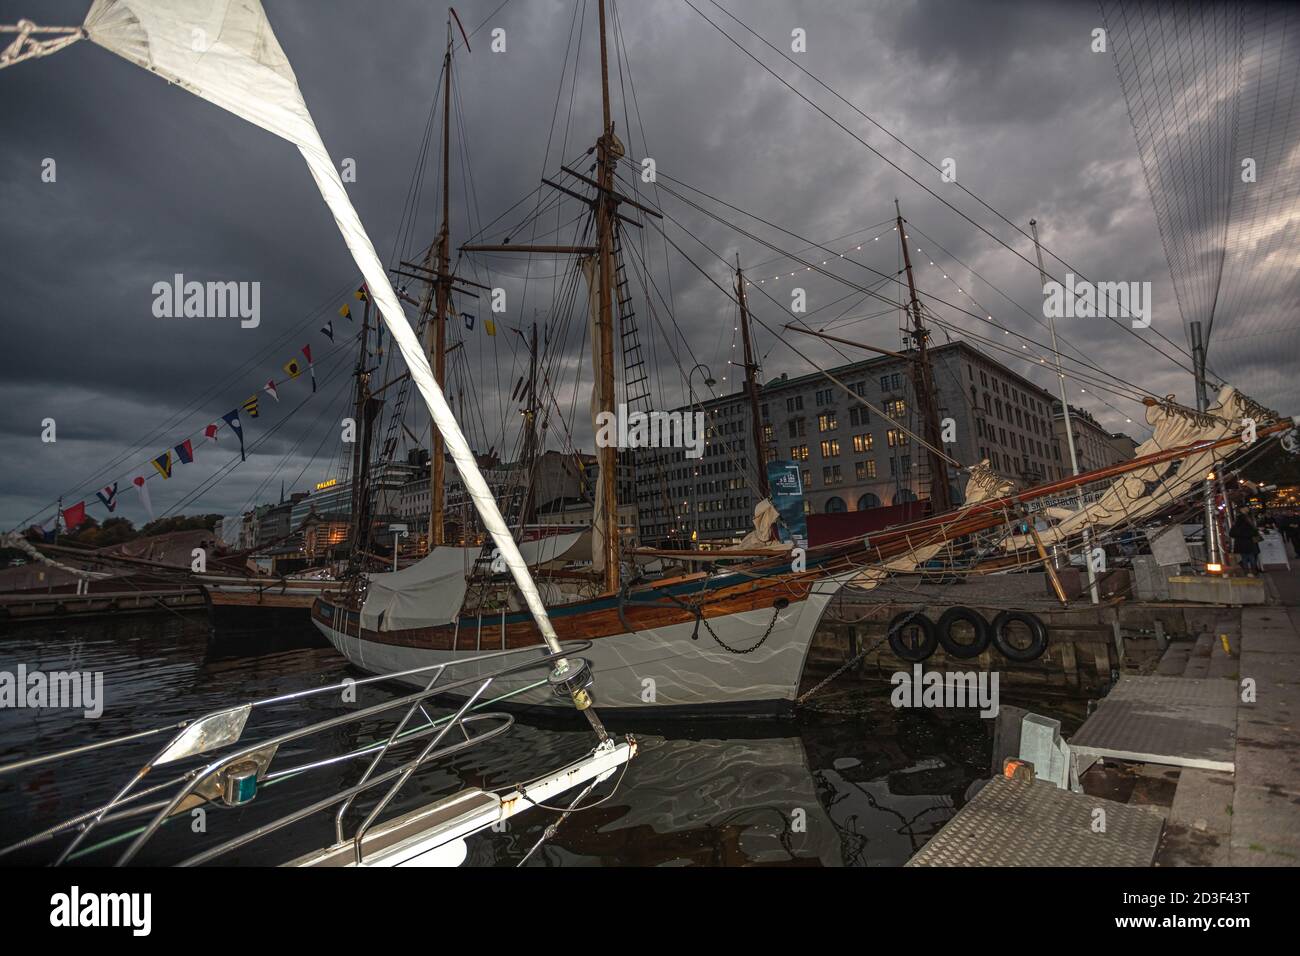 Helsinki, Uusimaa, Finland October 7, 2020 Moored boats and yachts at the Market Square to take part in the traditional delicatessen fair. Evening time. High quality photo Stock Photo